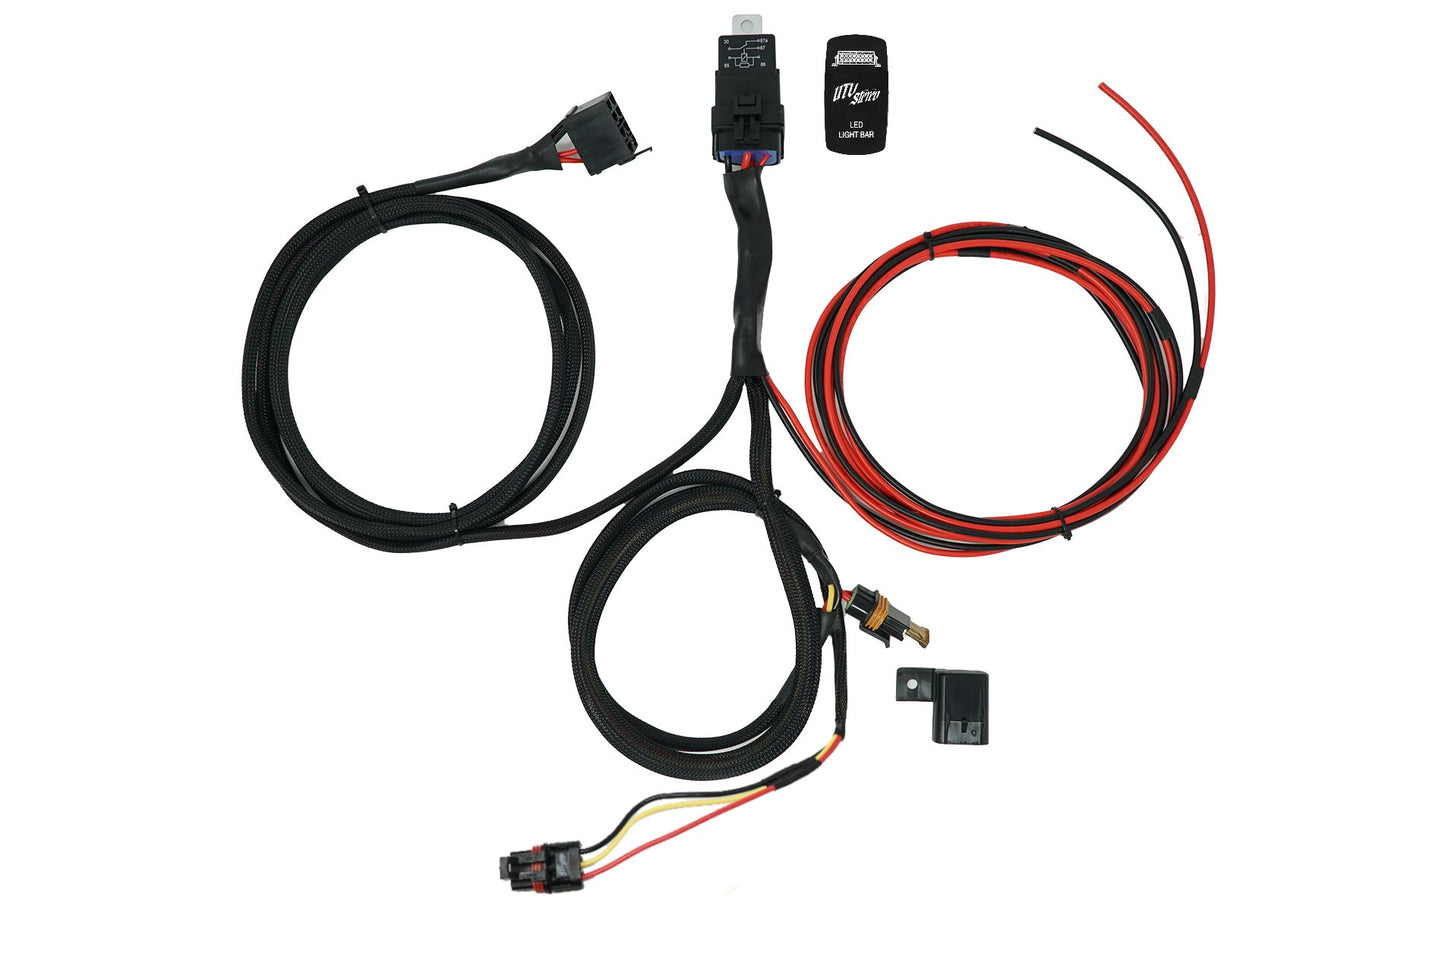 UTVS High Current Harness - For RZR Pro Series